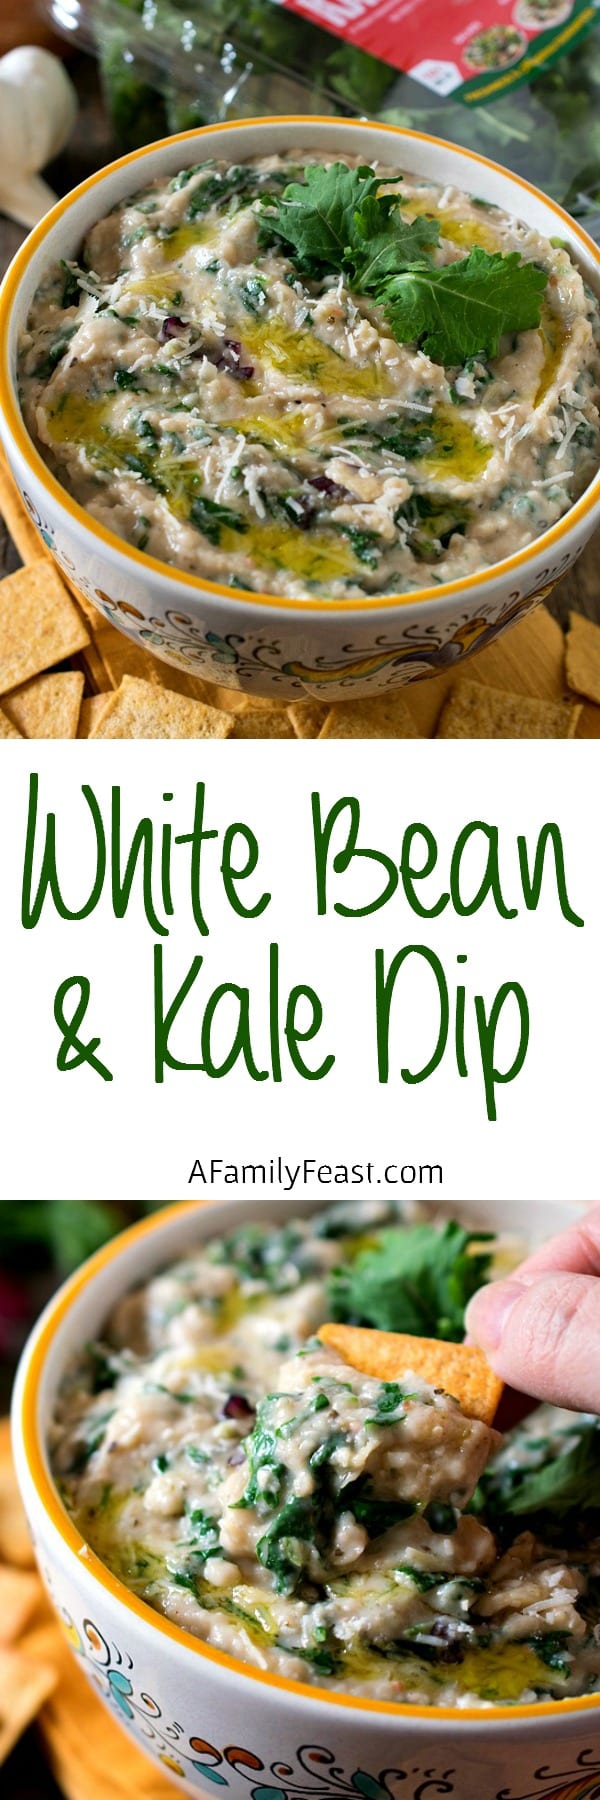 White Bean and Kale Dip - An easy and delicious dip with incredible flavors and full of healthy ingredients!